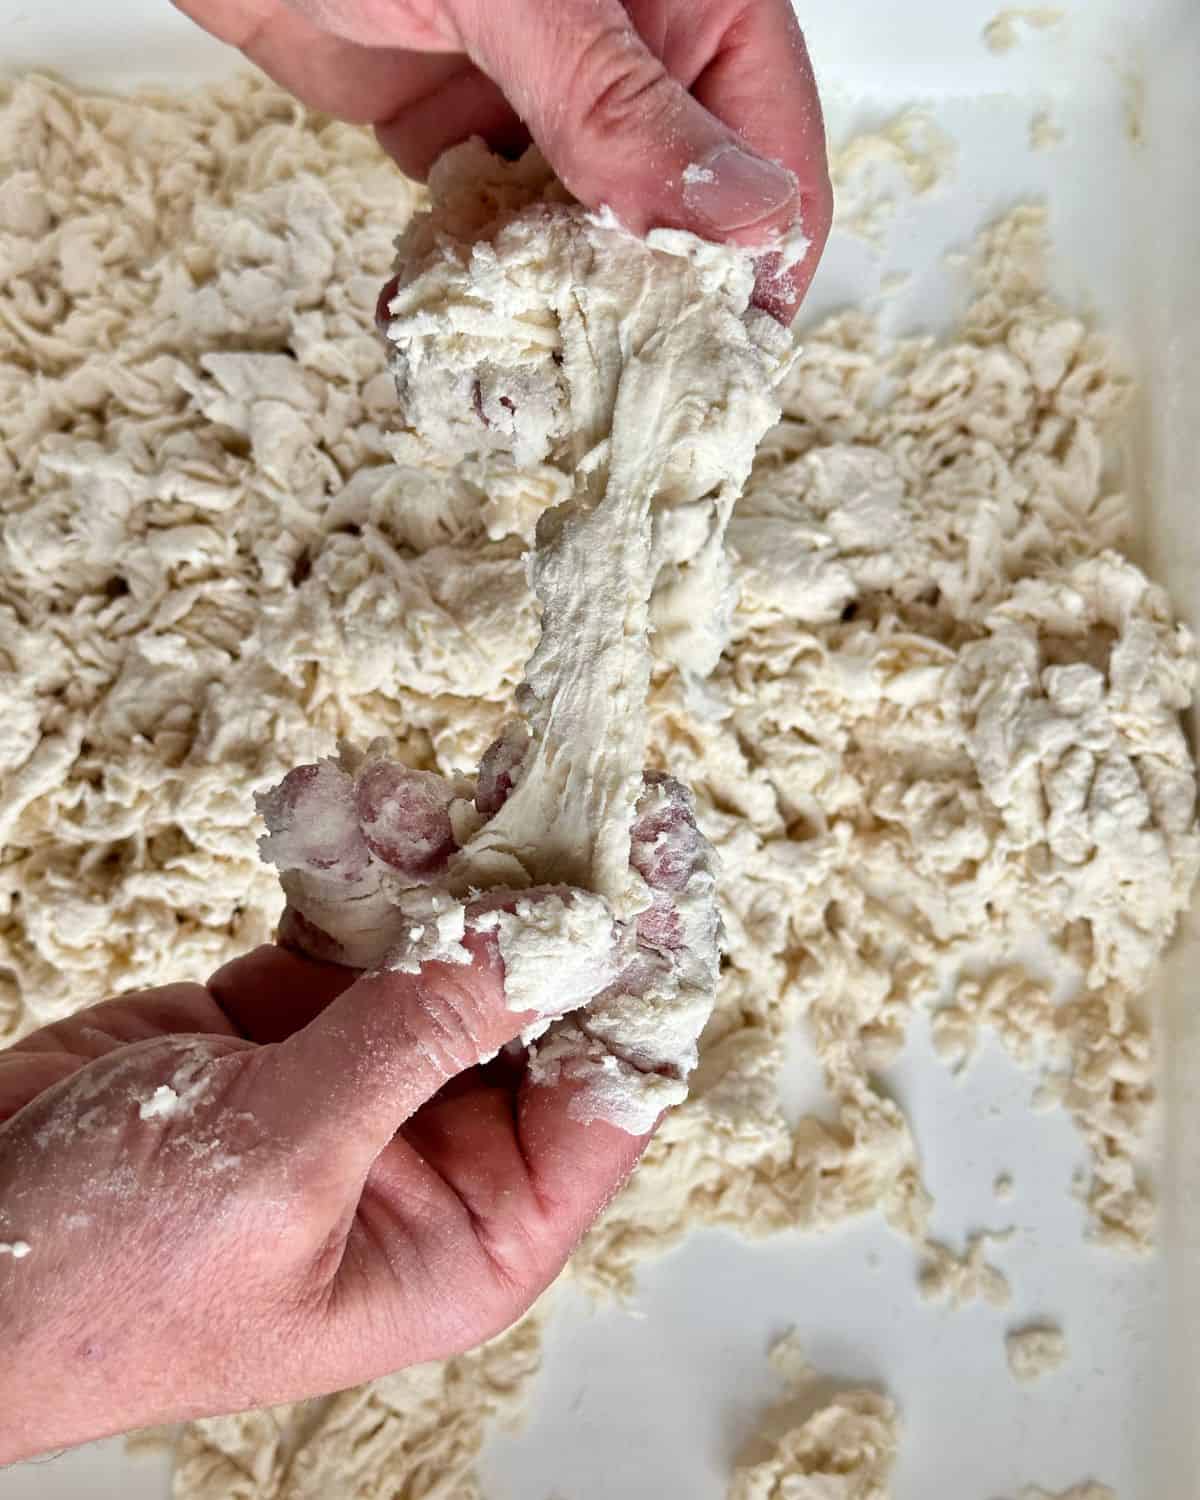 Pull some of the larger pieces of biga apart, you'll notice some moist centers that you can use to collect any remaining flour.